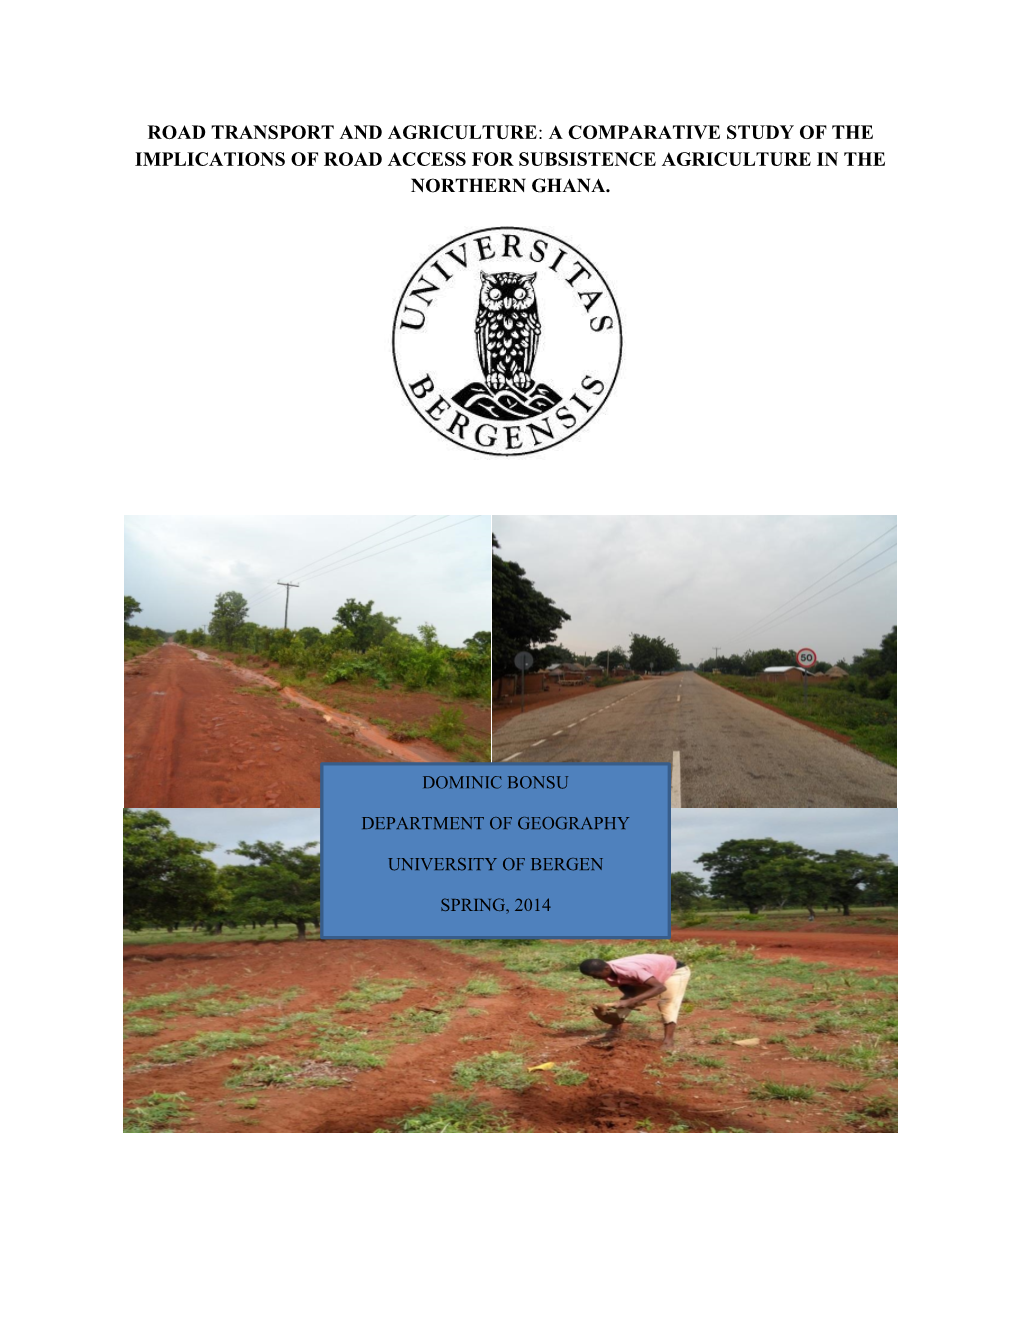 Road Transport and Agriculture: a Comparative Study of the Implications of Road Access for Subsistence Agriculture in the Northern Ghana